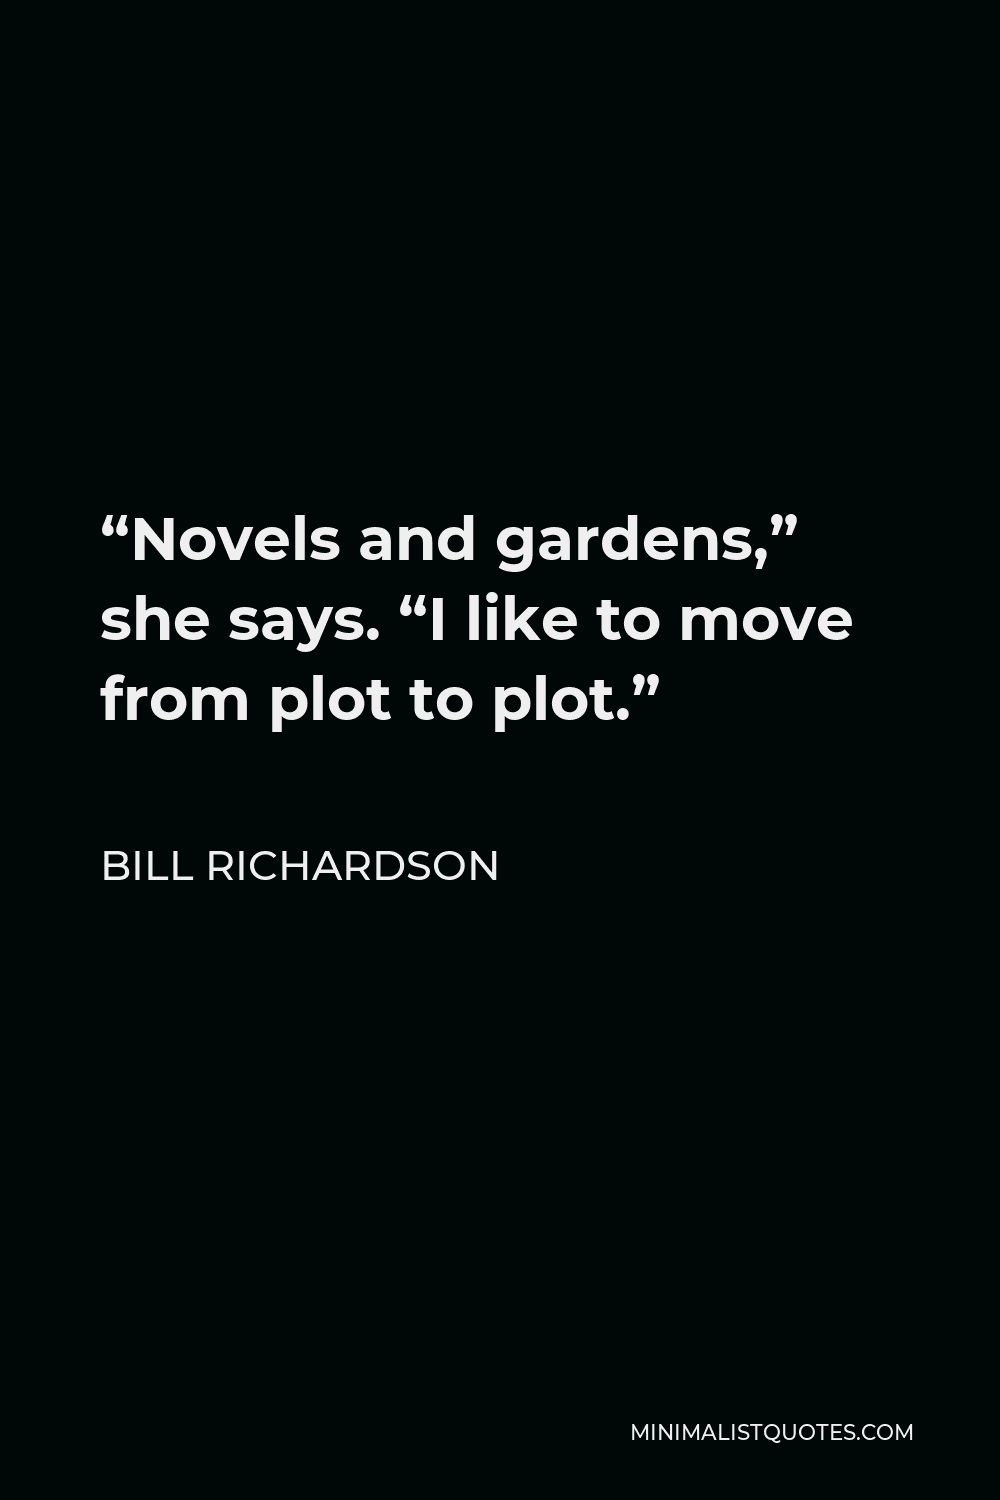 Bill Richardson Quote - “Novels and gardens,” she says. “I like to move from plot to plot.”